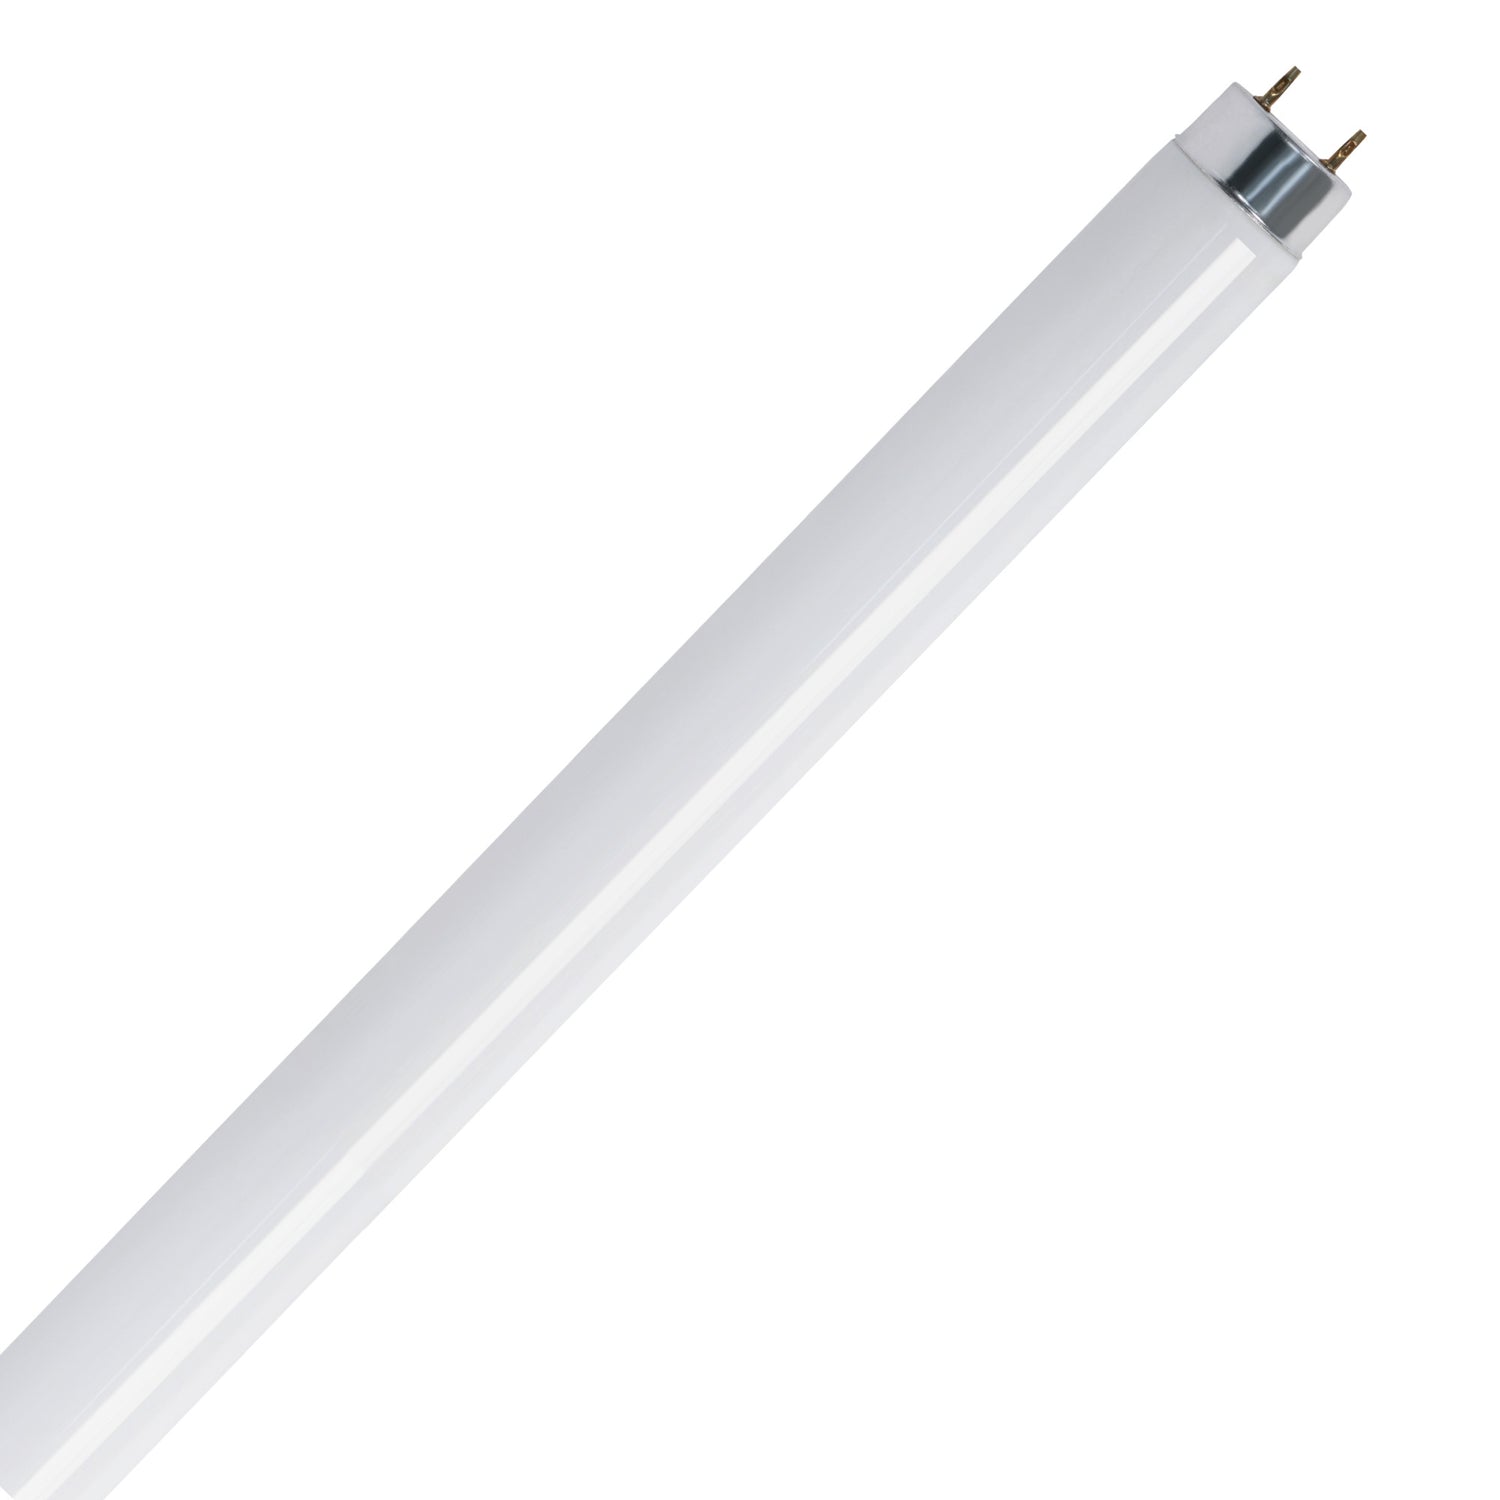 2 ft. 17W Cool White (4100K) G13 Base (T8 Replacement) Fluorescent Linear Light Tube (2-Pack)